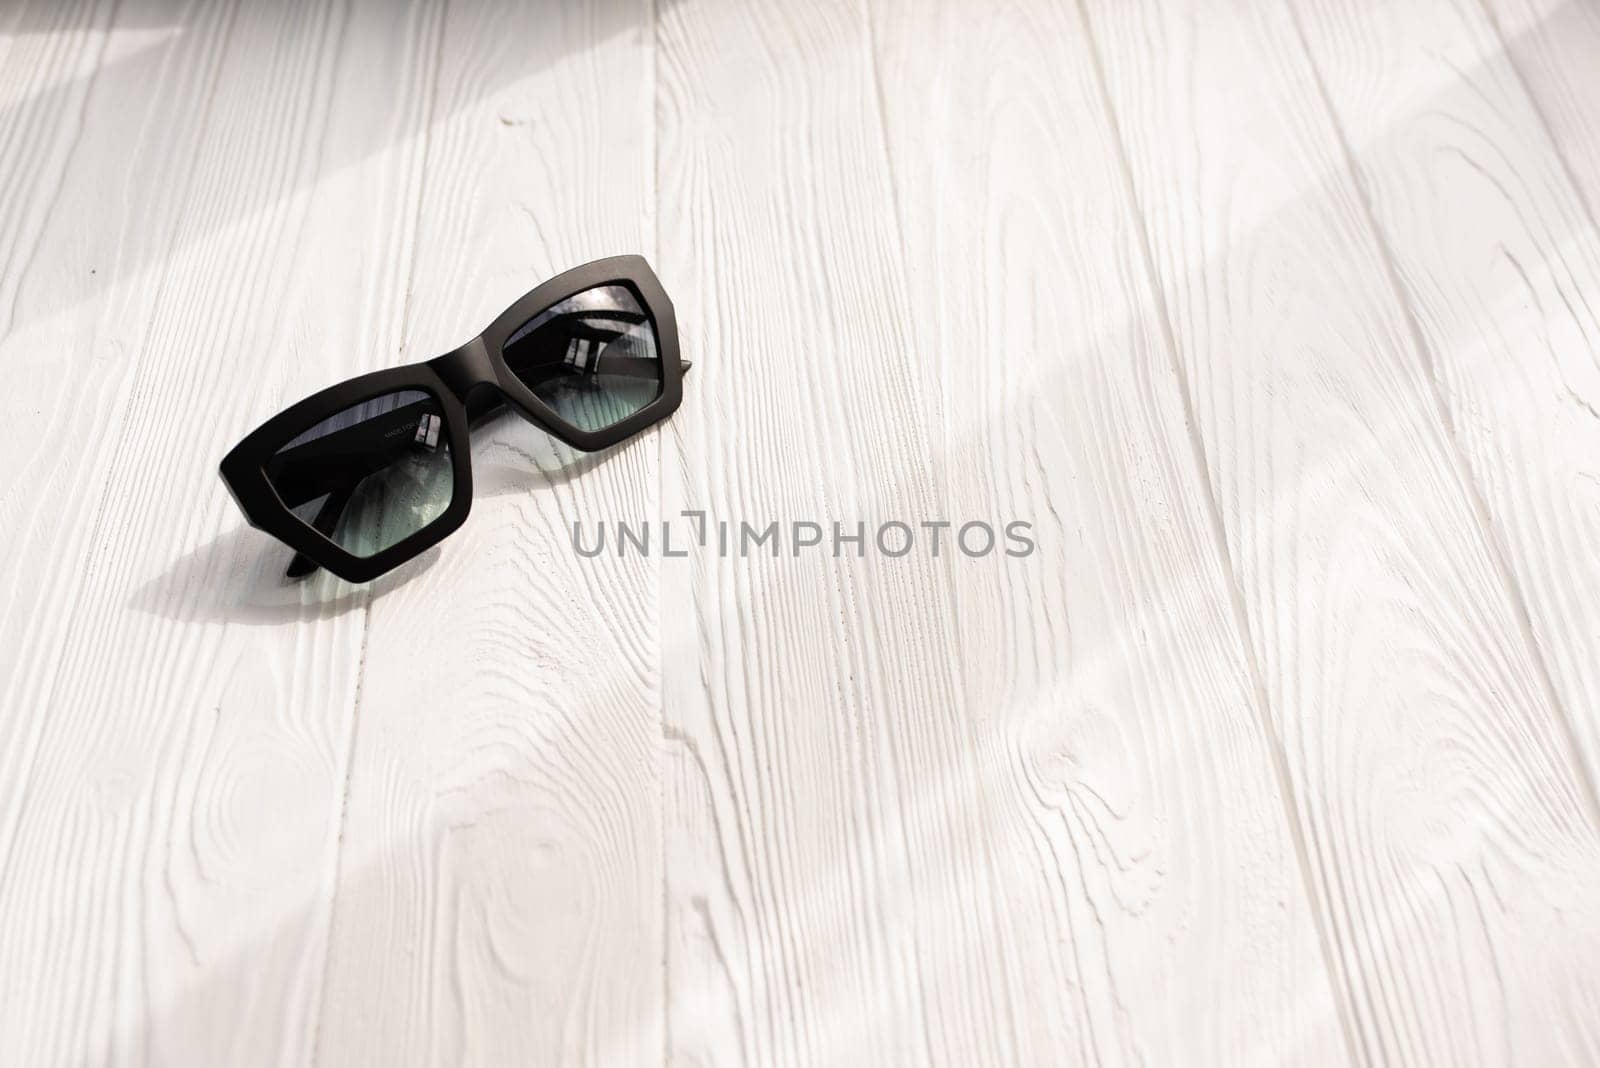 Stylish black sunglasses. Summer background mockup template text. pattern top view above white wooden background. Summer fashion accessories for beach. Women design sunglasses. Vacation concept